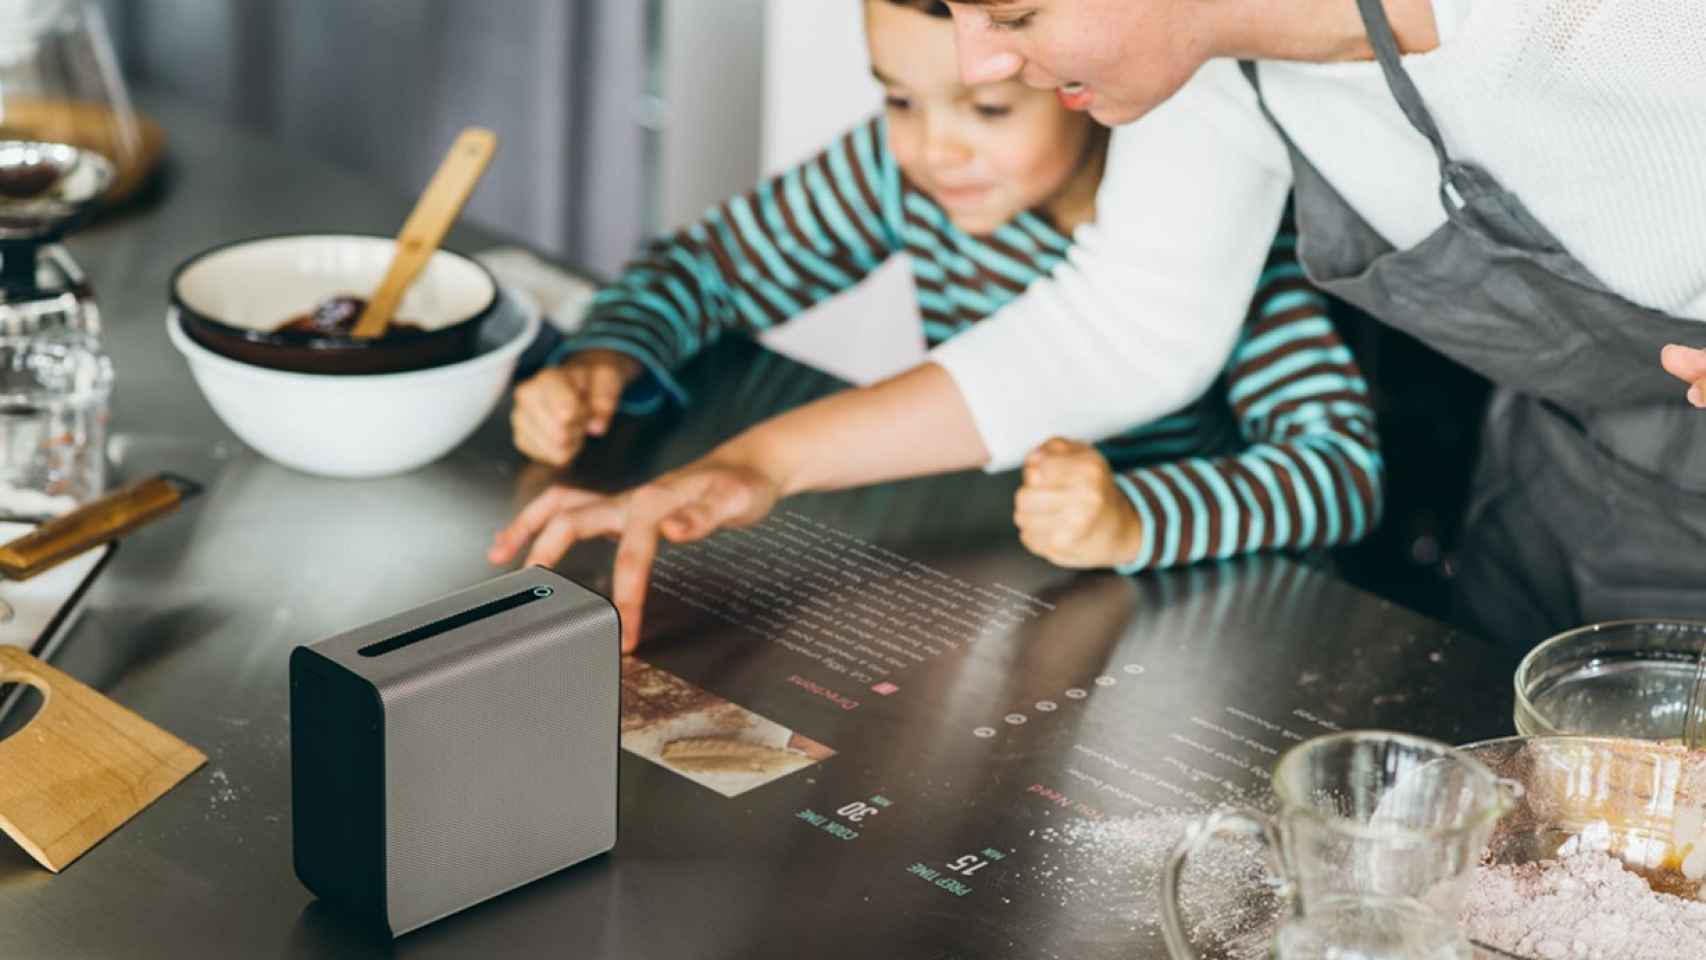 Sony Xperia Touch, el proyector táctil con Android